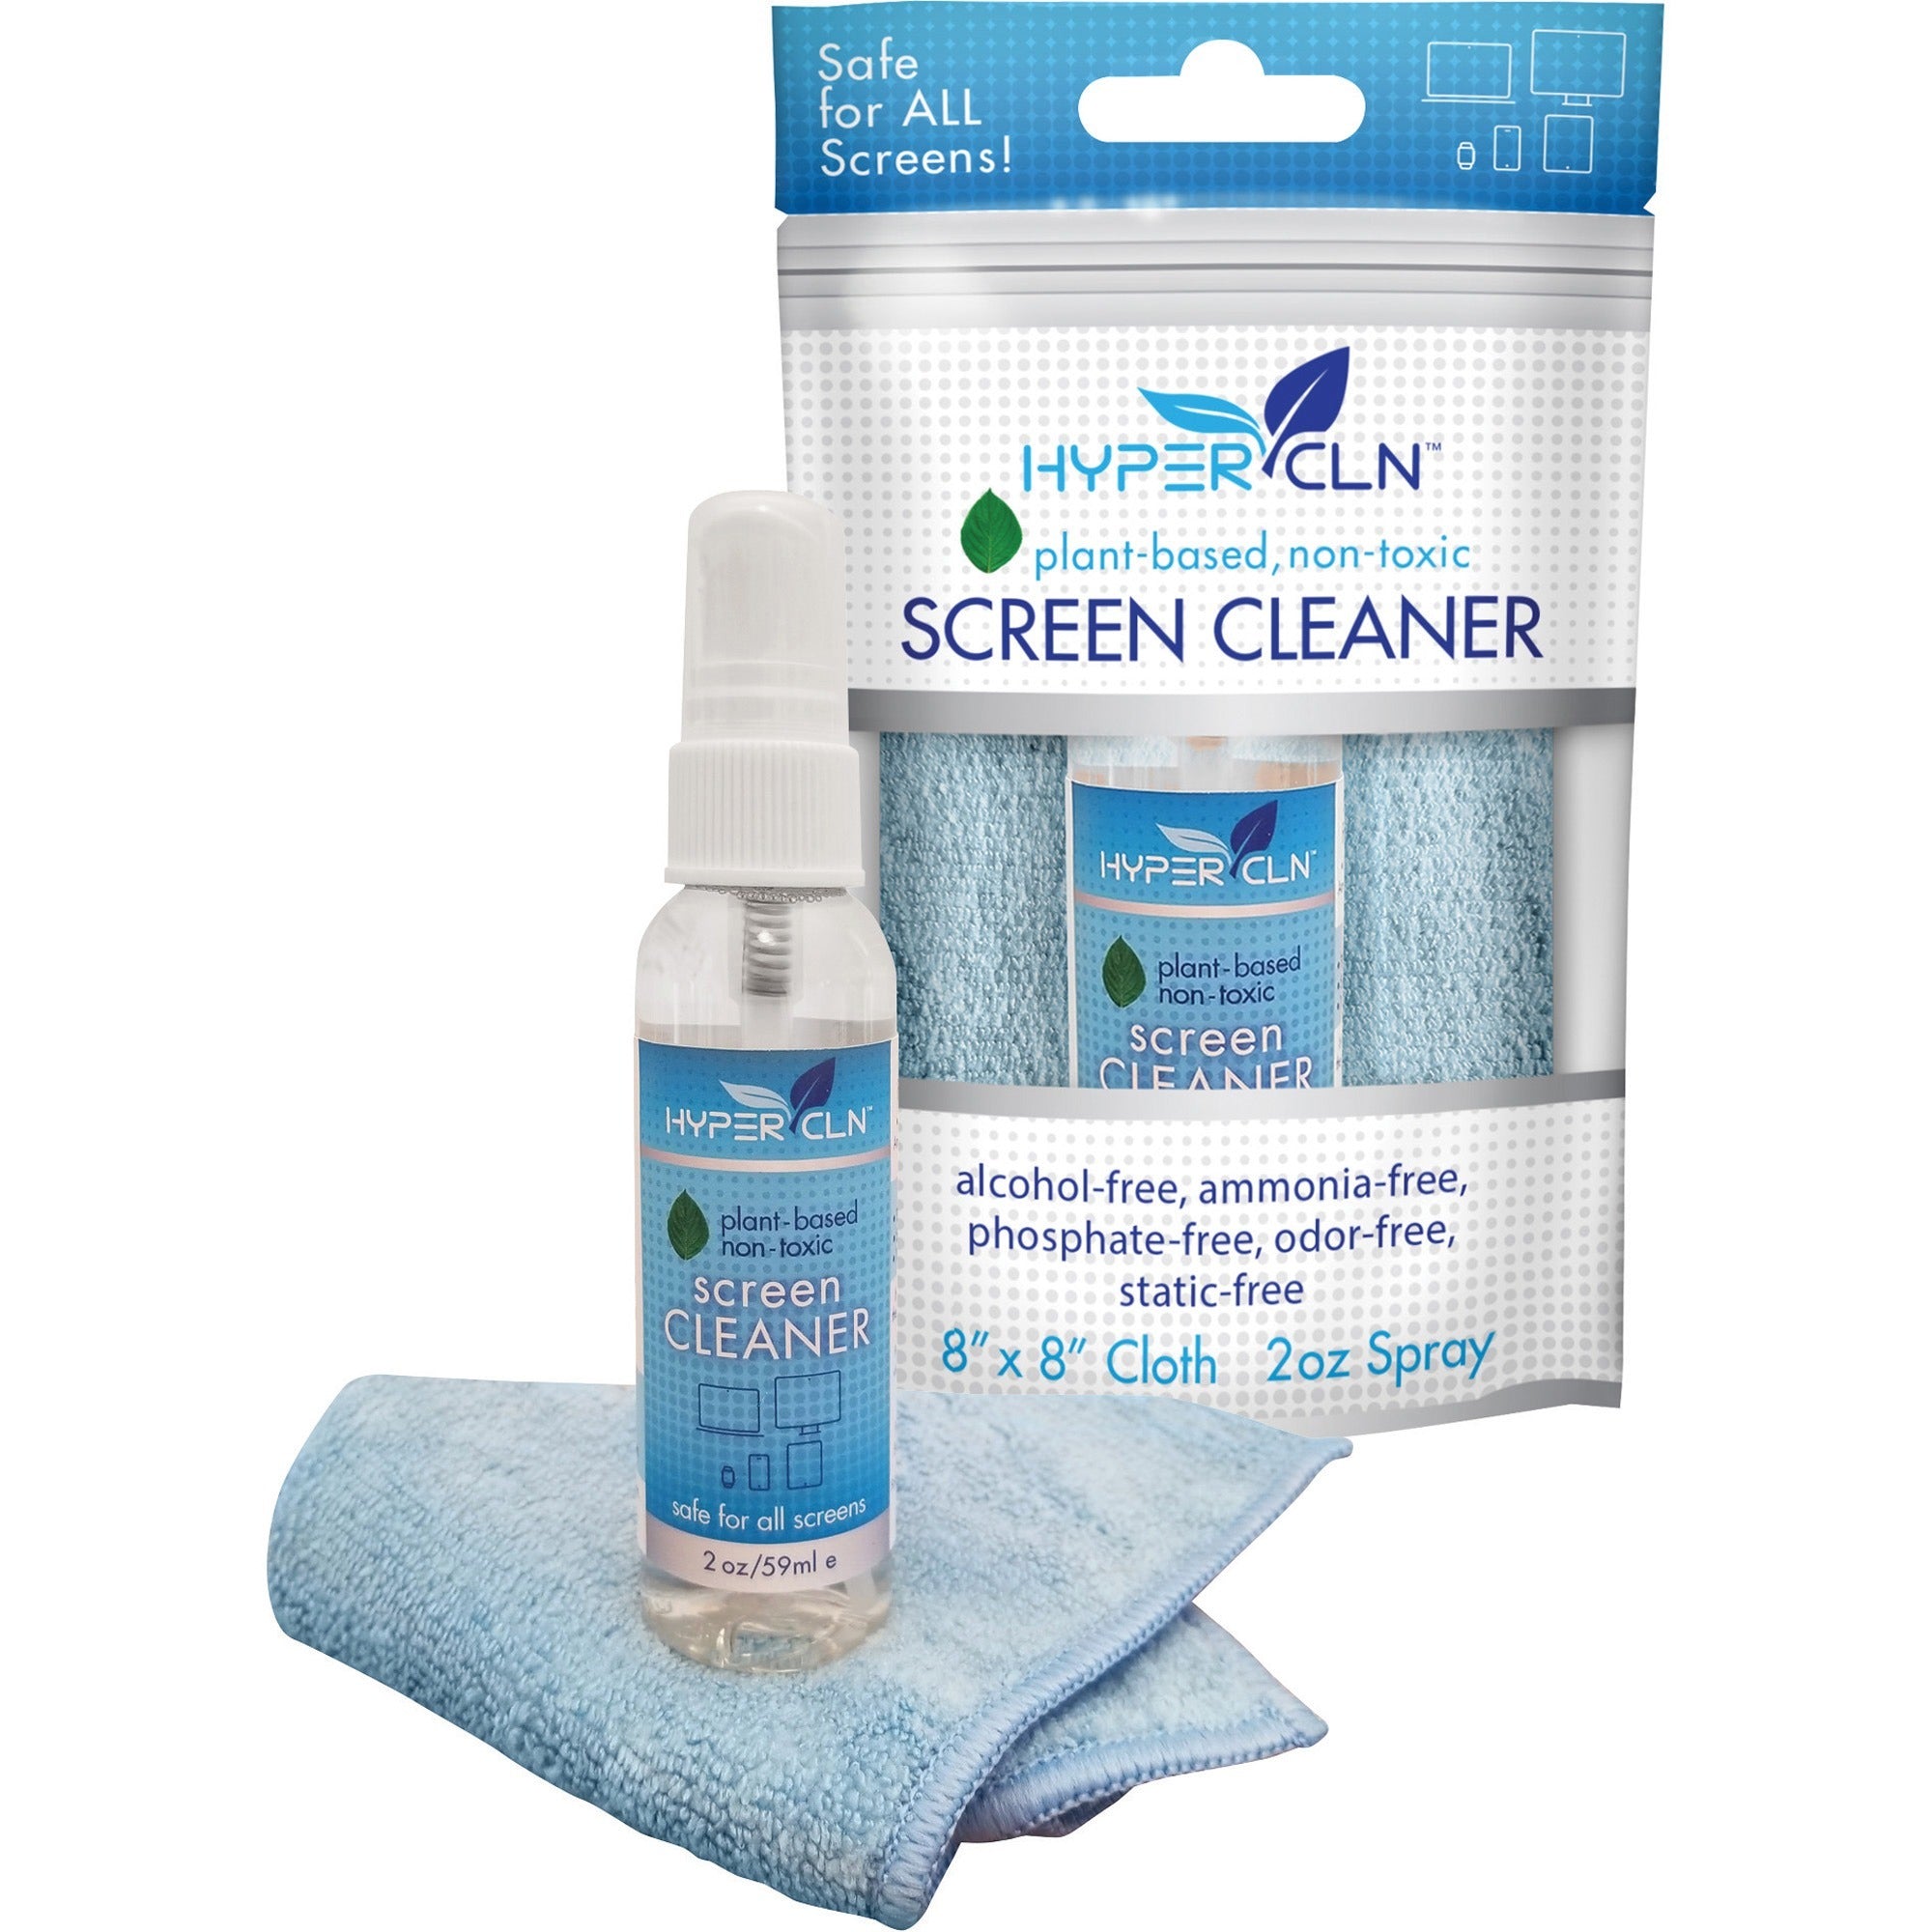 falcon-hyperclean-plant-based-screen-cleaner-kit-for-multipurpose-2-fl-oz-anti-static-non-toxic-non-alcohol-ammonia-free-phosphate-free-scratch-freespray-bottle-1-kit_falhcn2 - 1